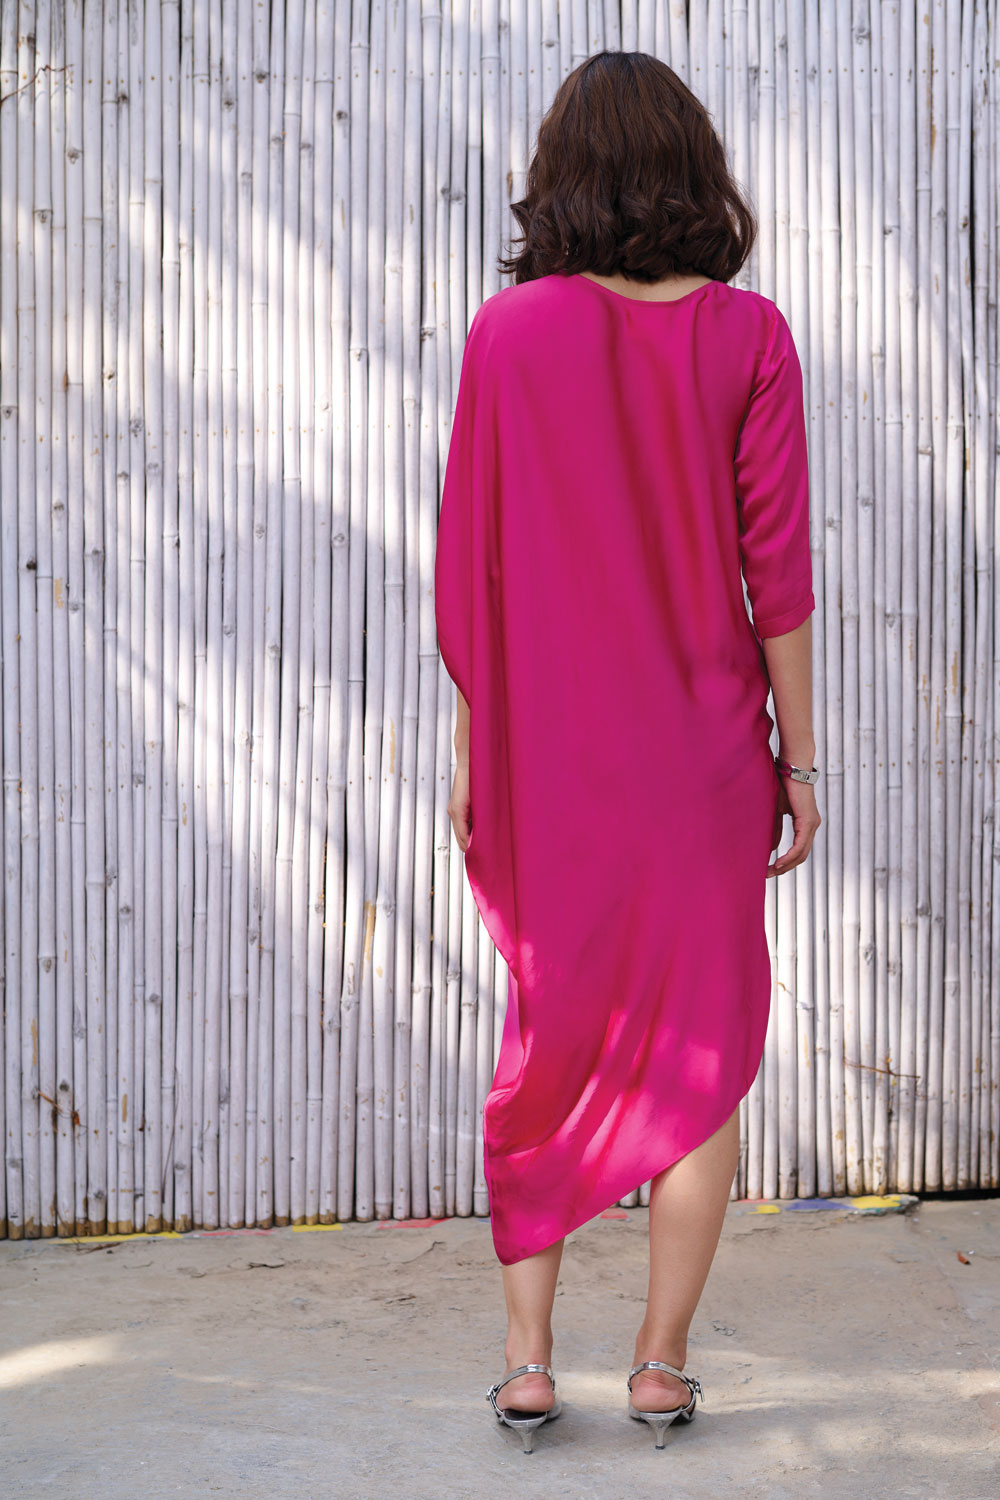 Solid Asymmetric Drape Dress at Kamakhyaa by Kanelle. This item is Dresses, Festive Wear, Hand Embroidered, Midi Dresses, Natural, Partywear Co-ords, Pink, Rang, Regular Fit, Solid, Viscose Satin, Womenswear